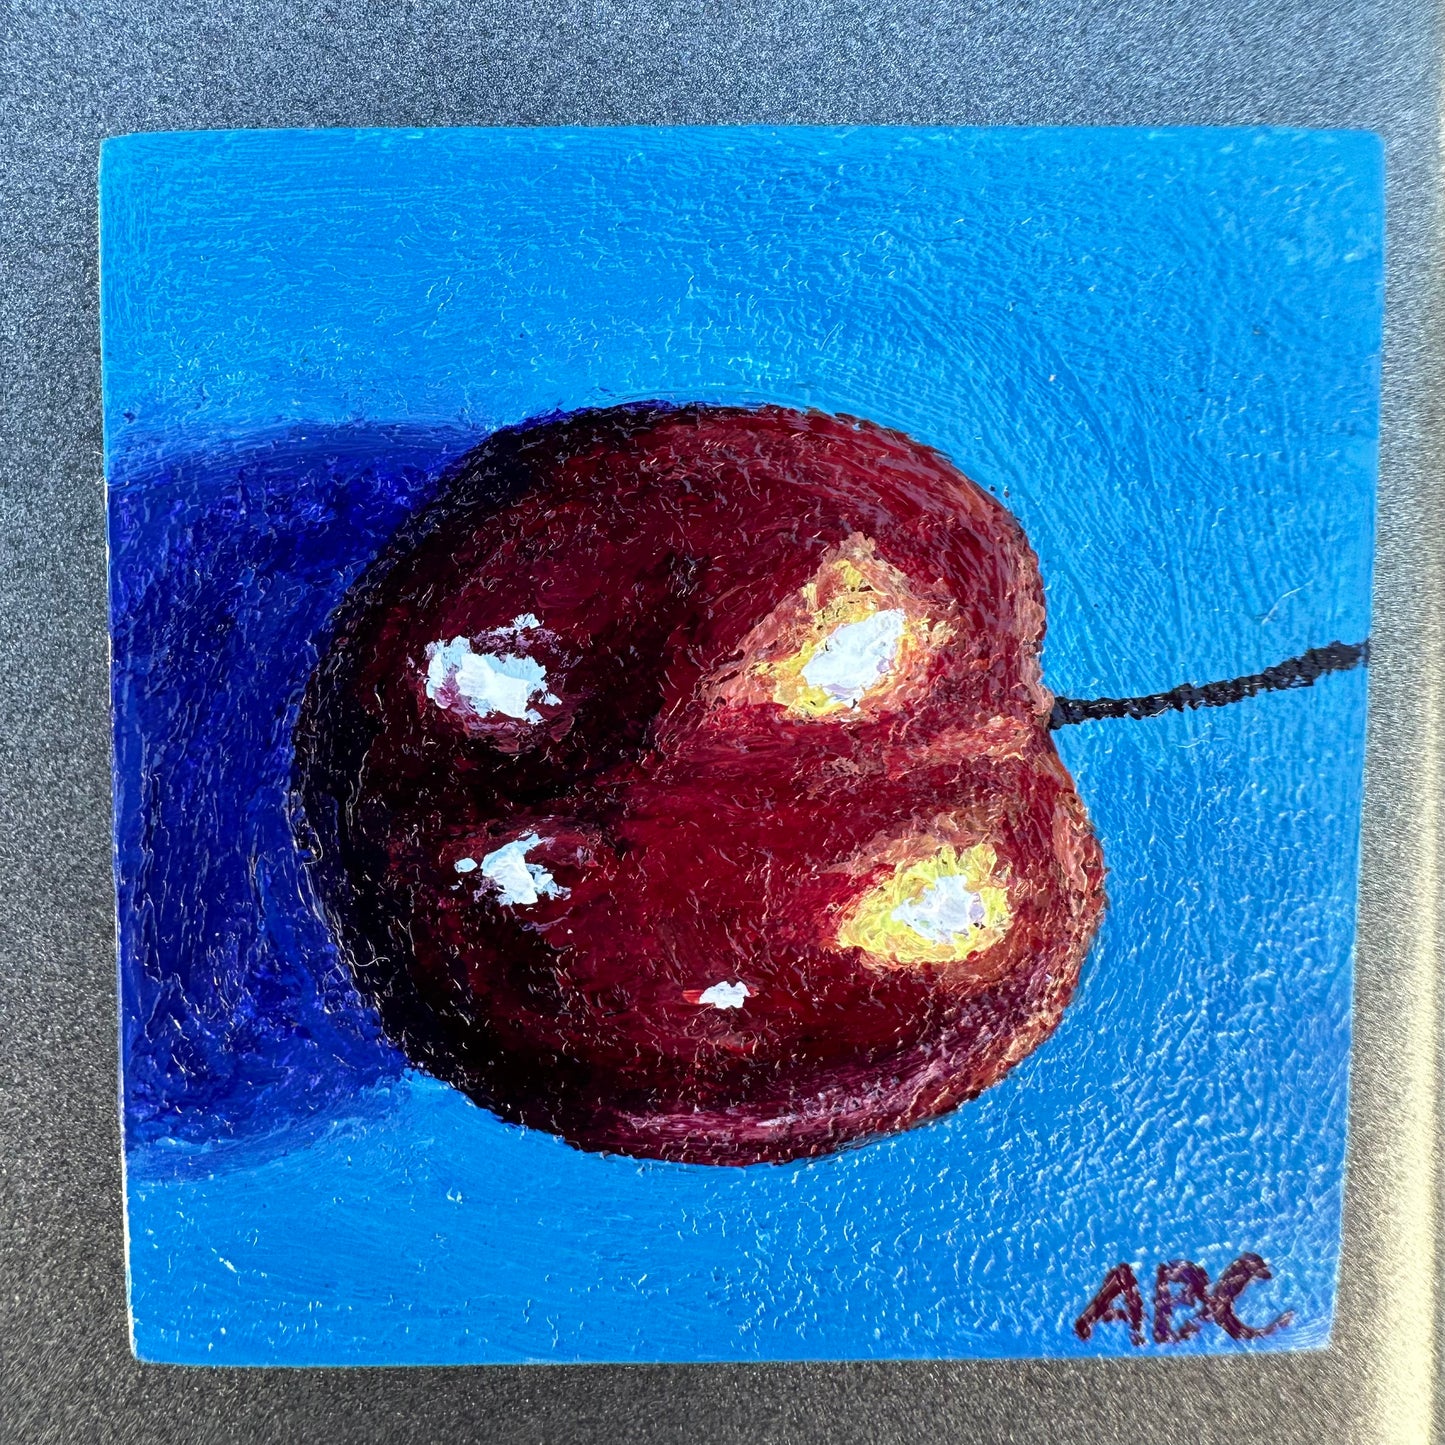 Teeny Cherry - 2x2 - oil on panel - magnet oil painting